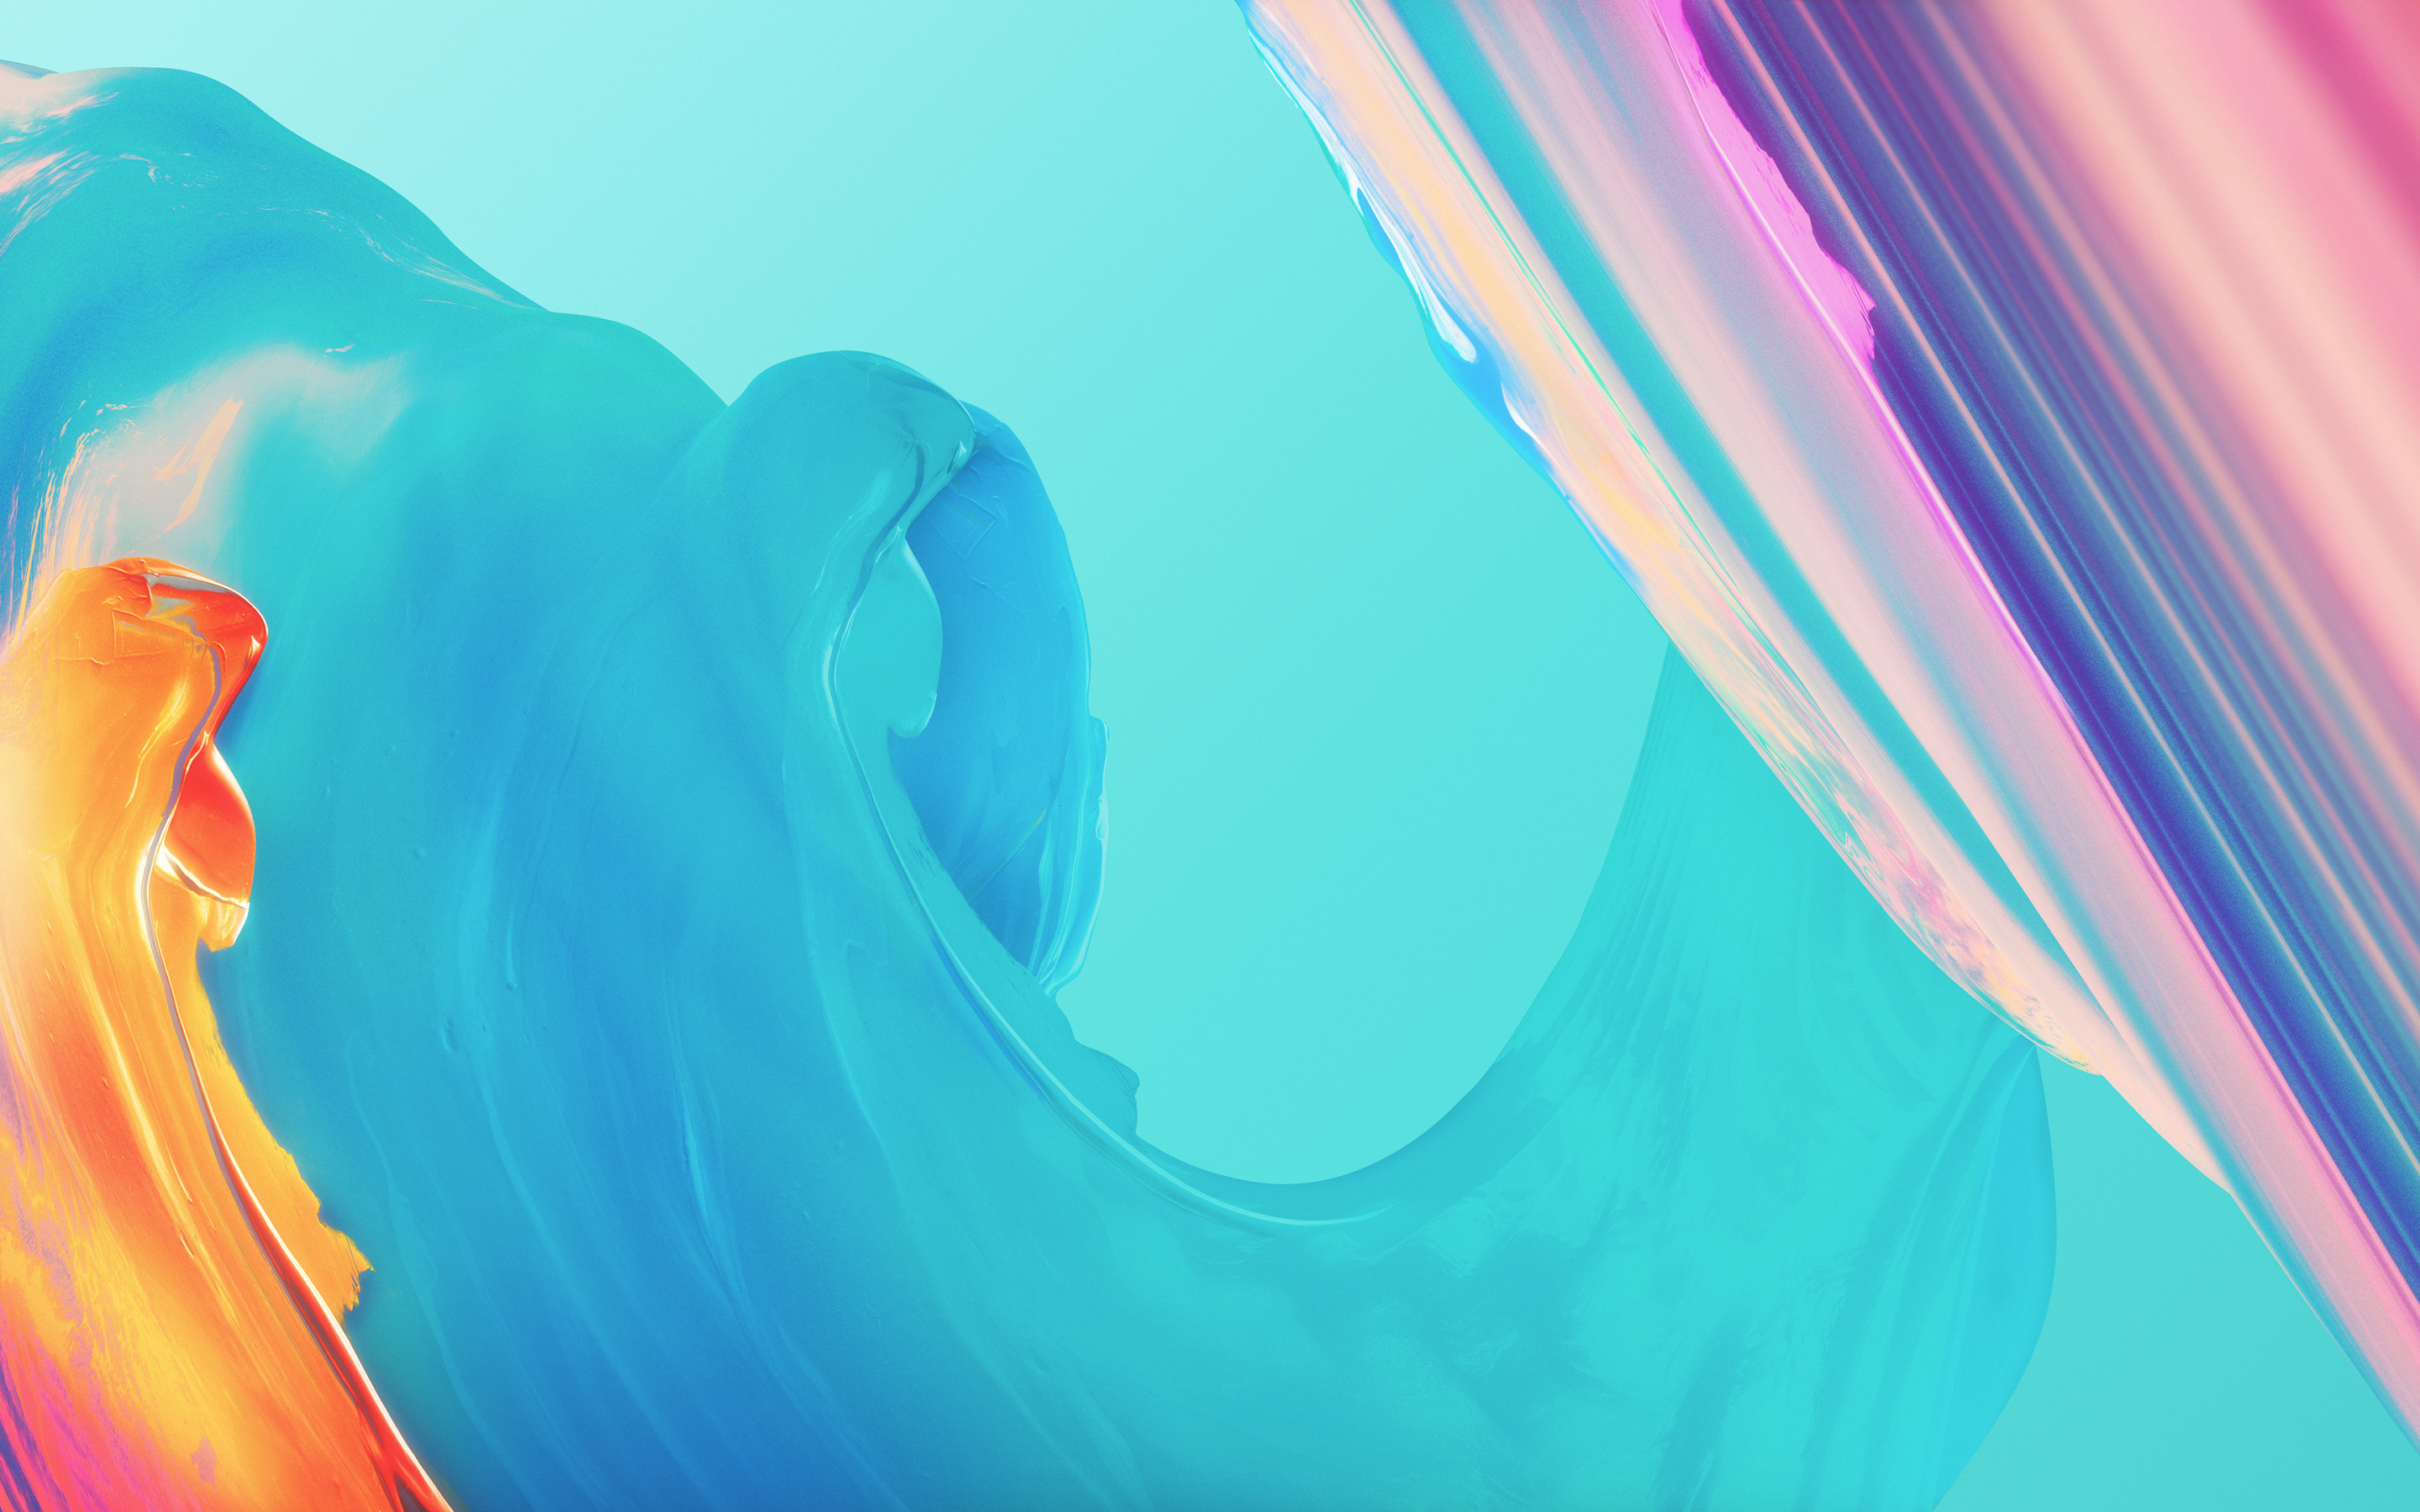 Paint, colorful waves, oneplus 5t, stock, 2880x1800 wallpaper